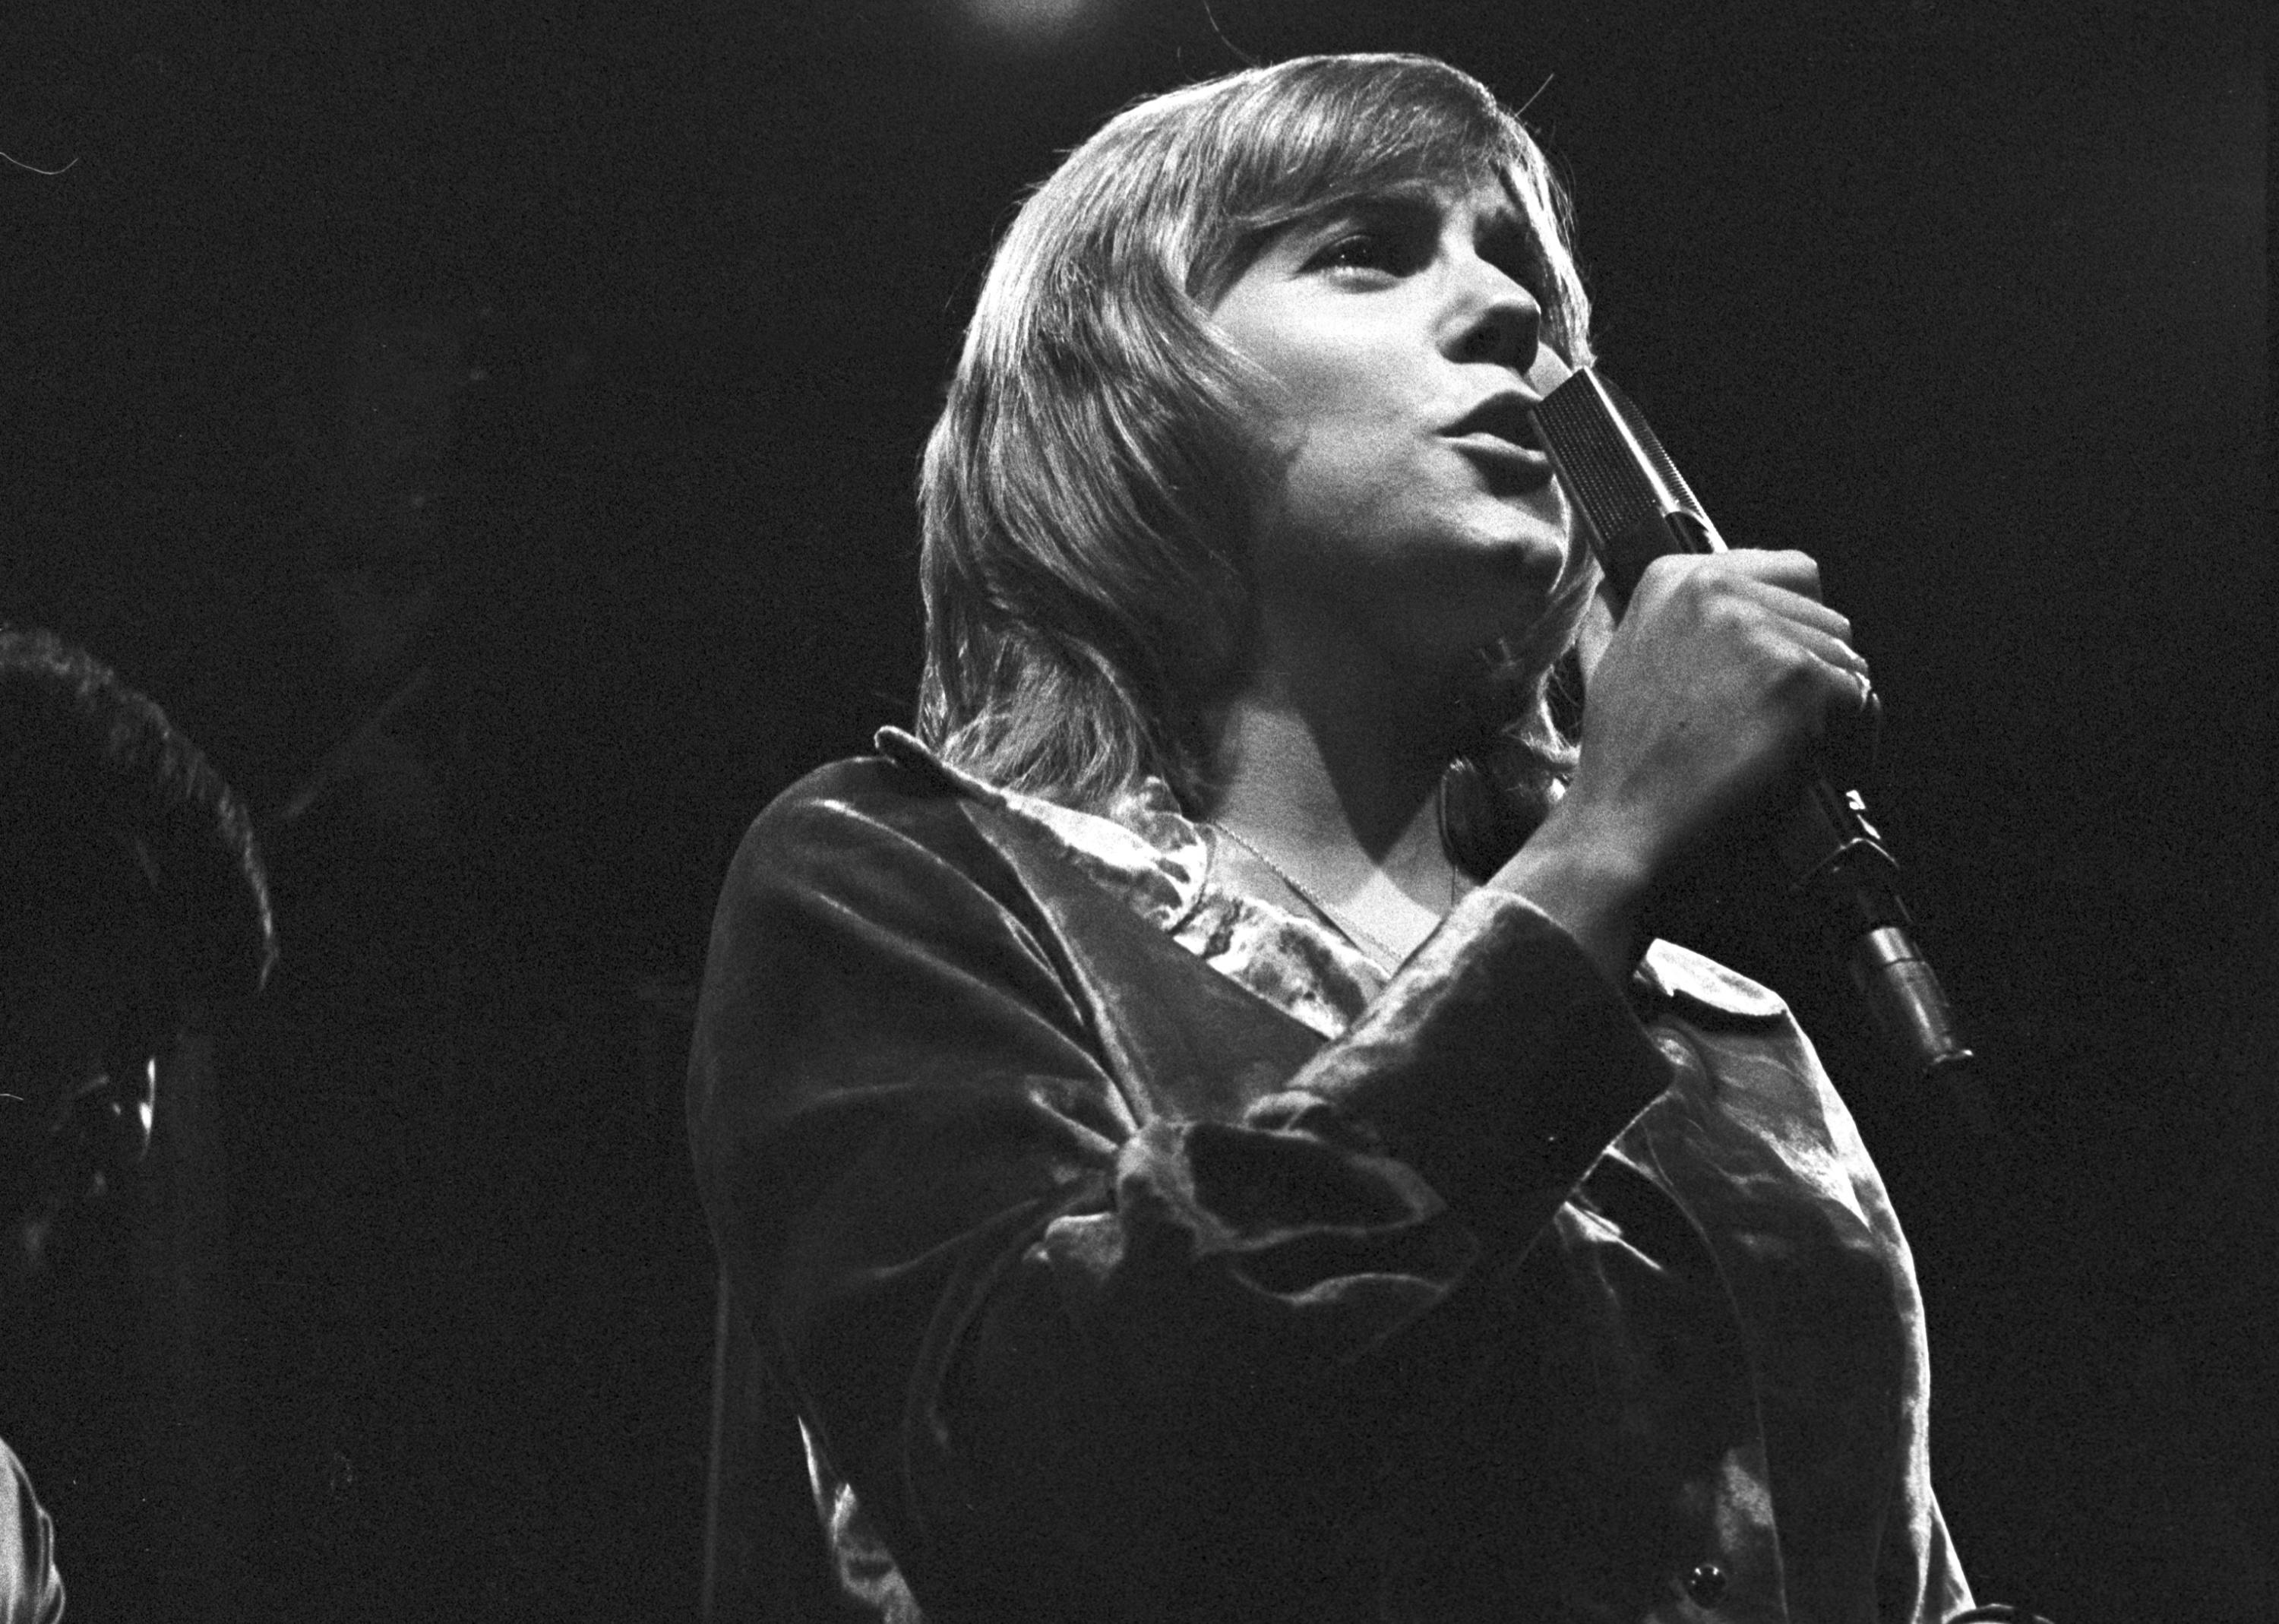 Anne Murray performing on stage.